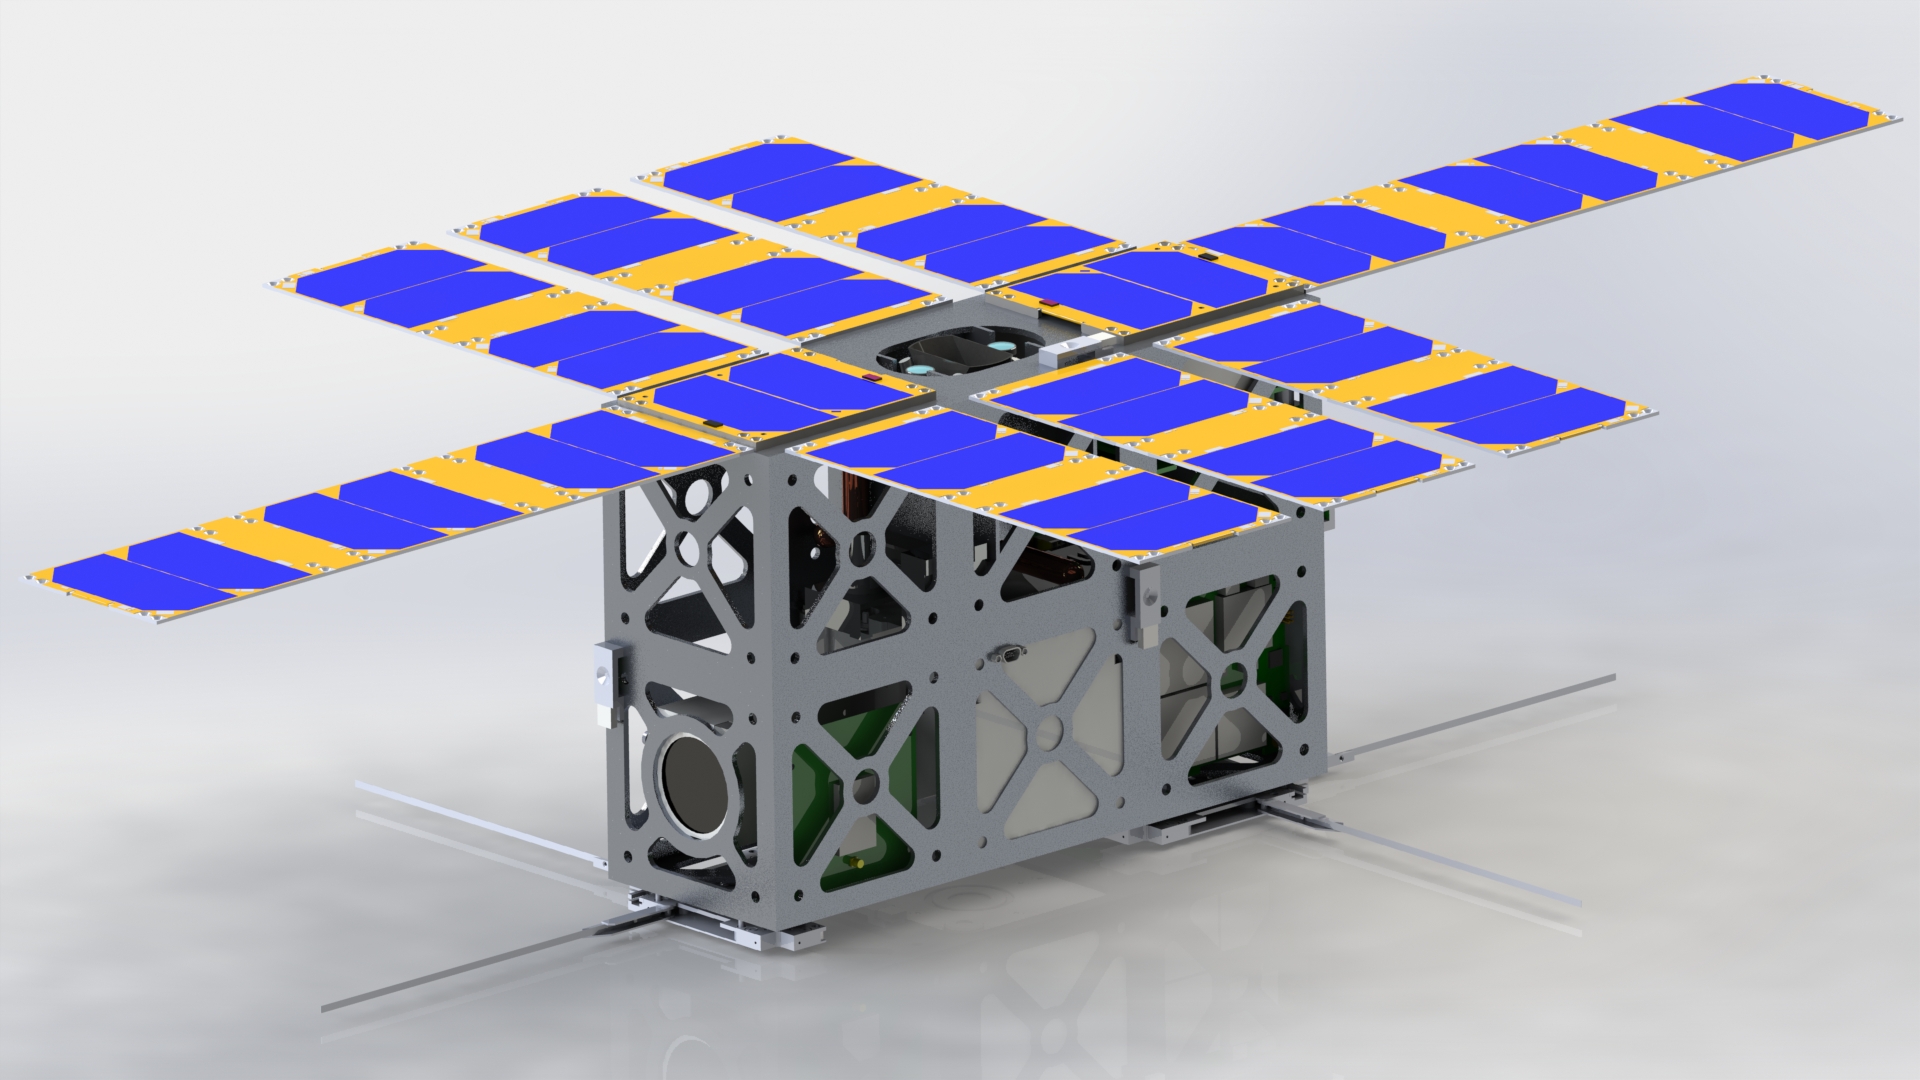 CubeSat Used for Analysis